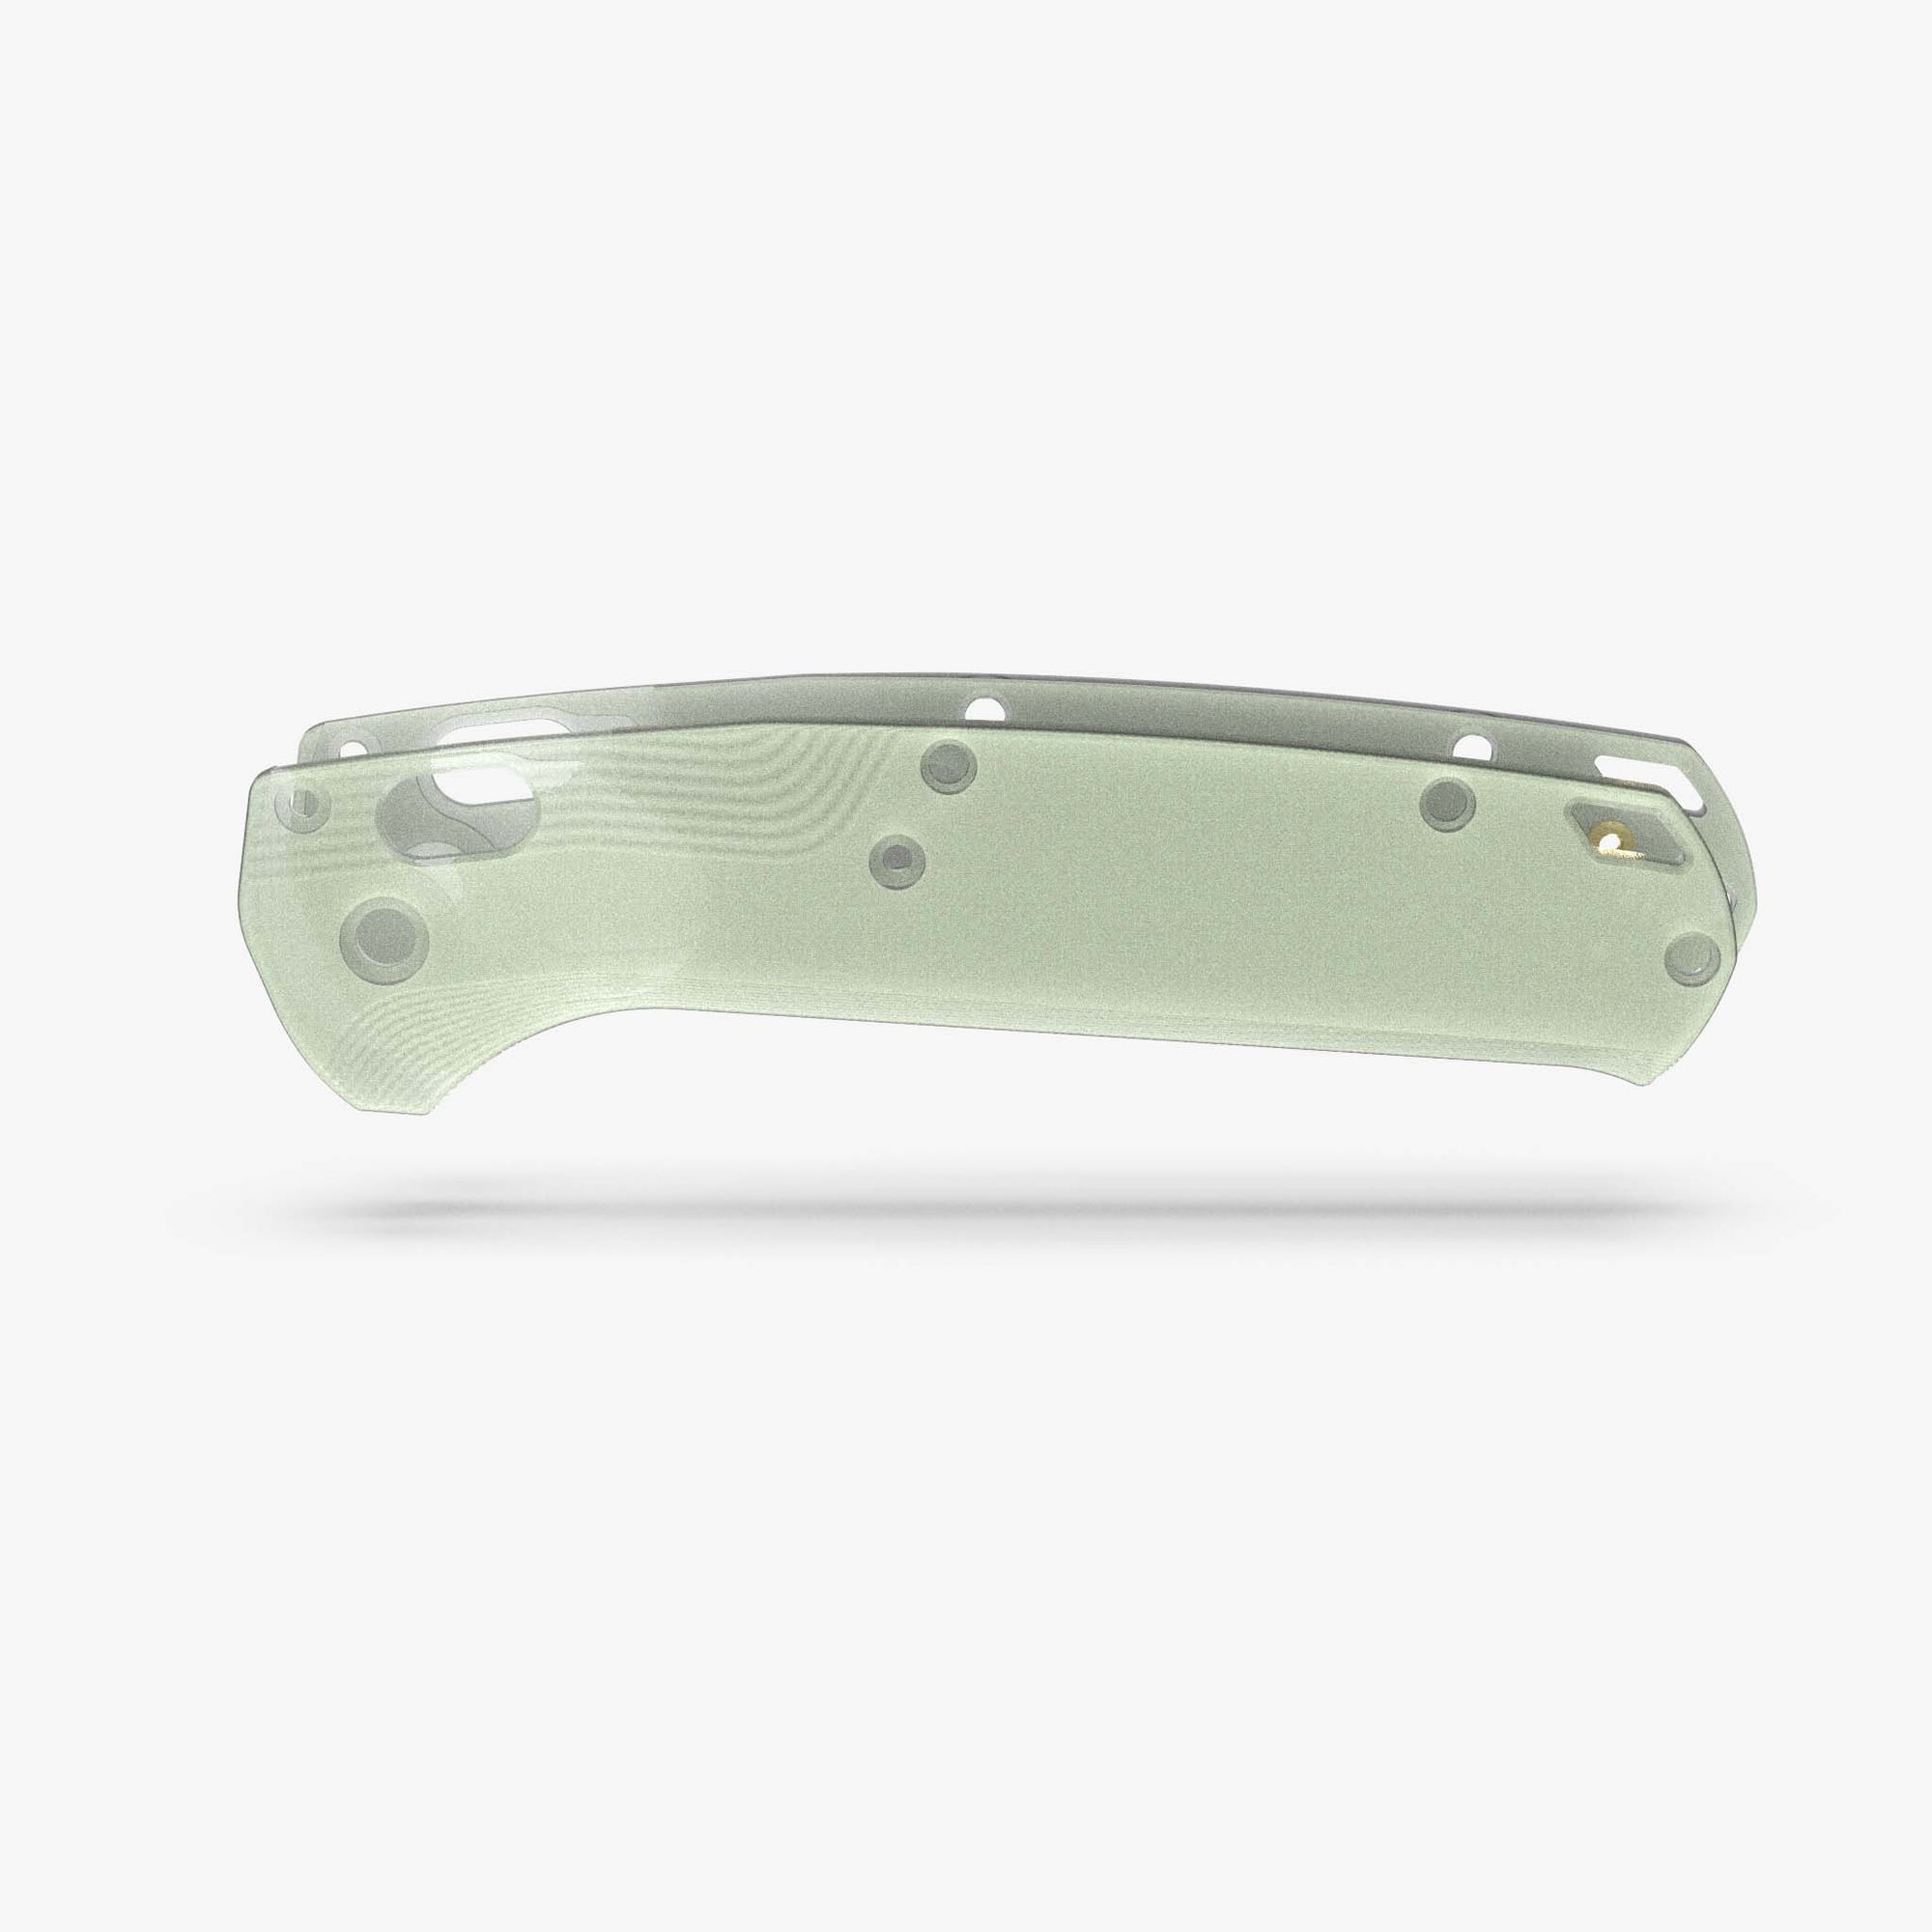 G-10 Scales for Benchmade Taggedout Knife-Natural Jade